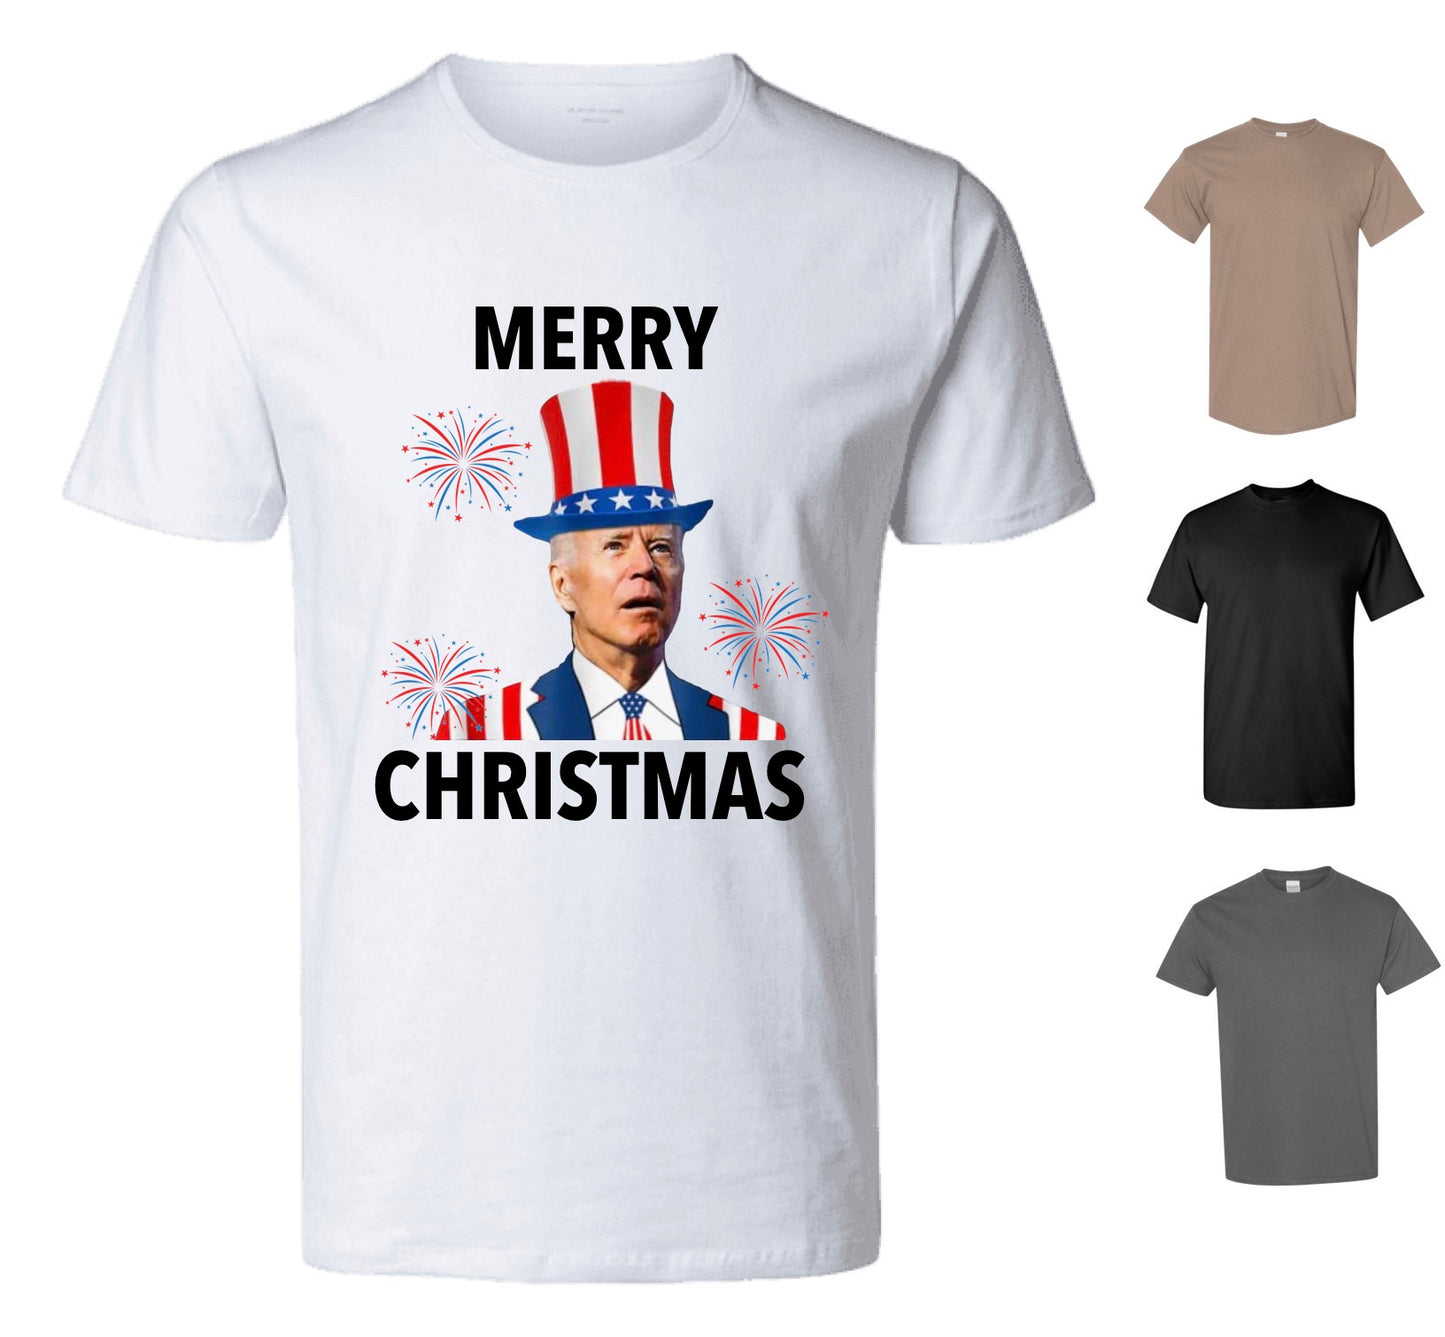 Merry Christmas — 4th of July Special (Free Shipping)